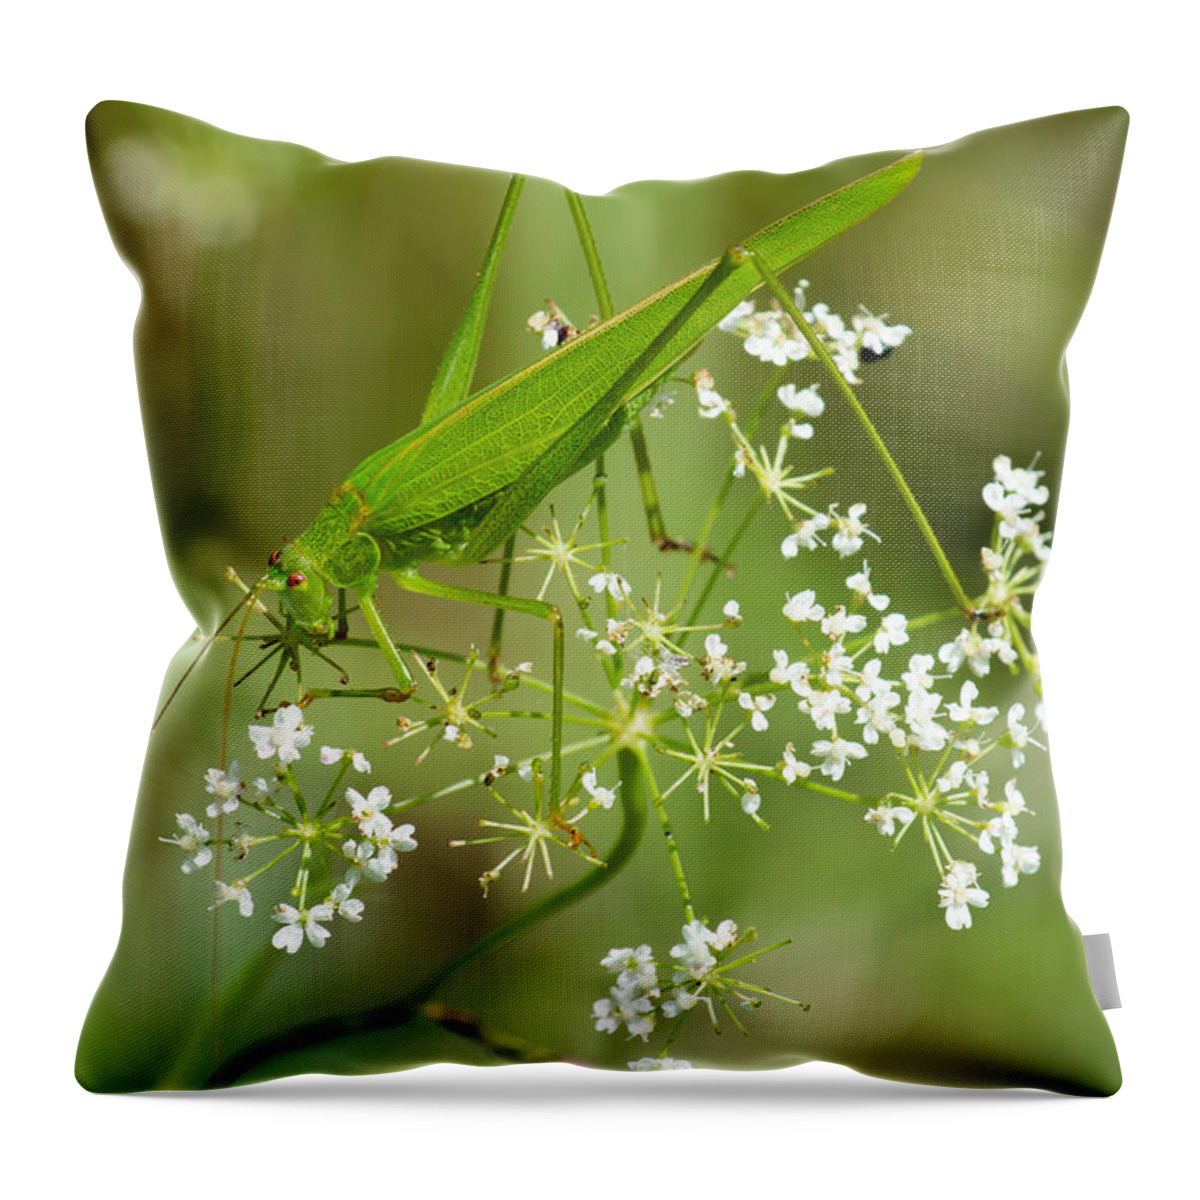 Grasshopper Throw Pillow featuring the photograph Green Grasshopper by Andreas Berthold